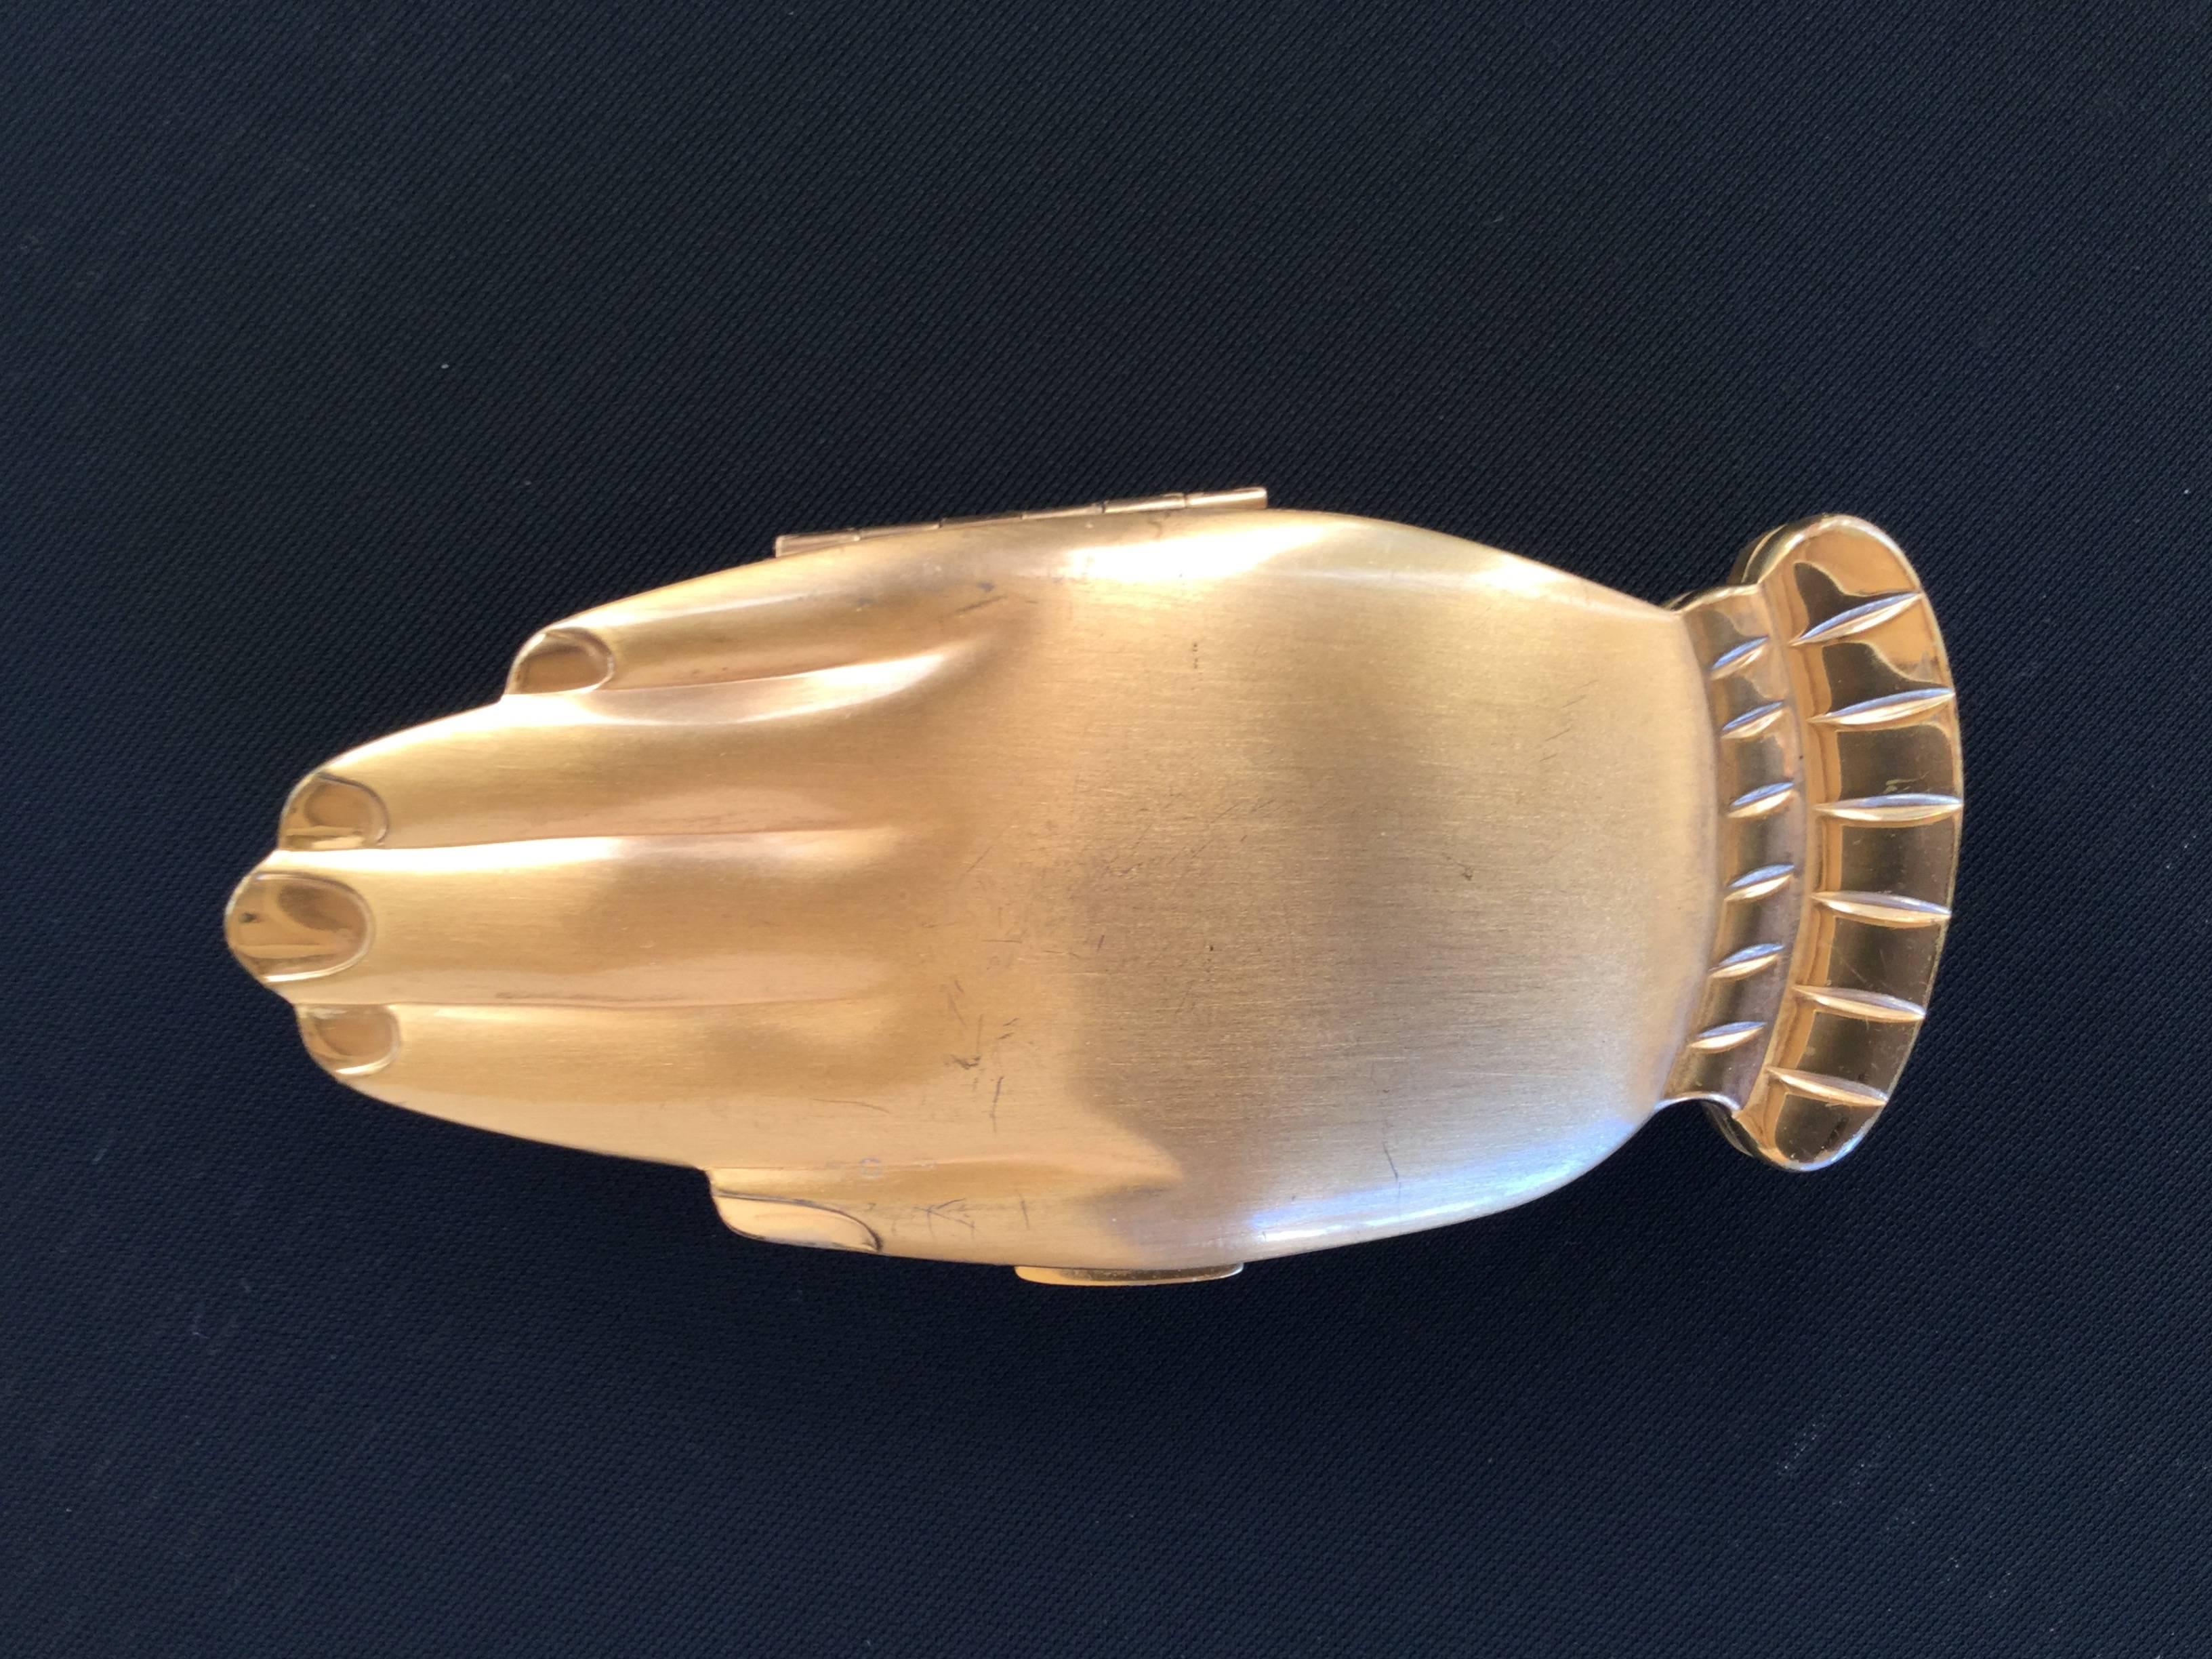 
This is one of the most iconic and sought after of all vintage figural
compacts.

The Volupte "Golden Gesture" compact depicts two slender,
manicured hands clasped as if in prayer. 

The design is just magical.

There is